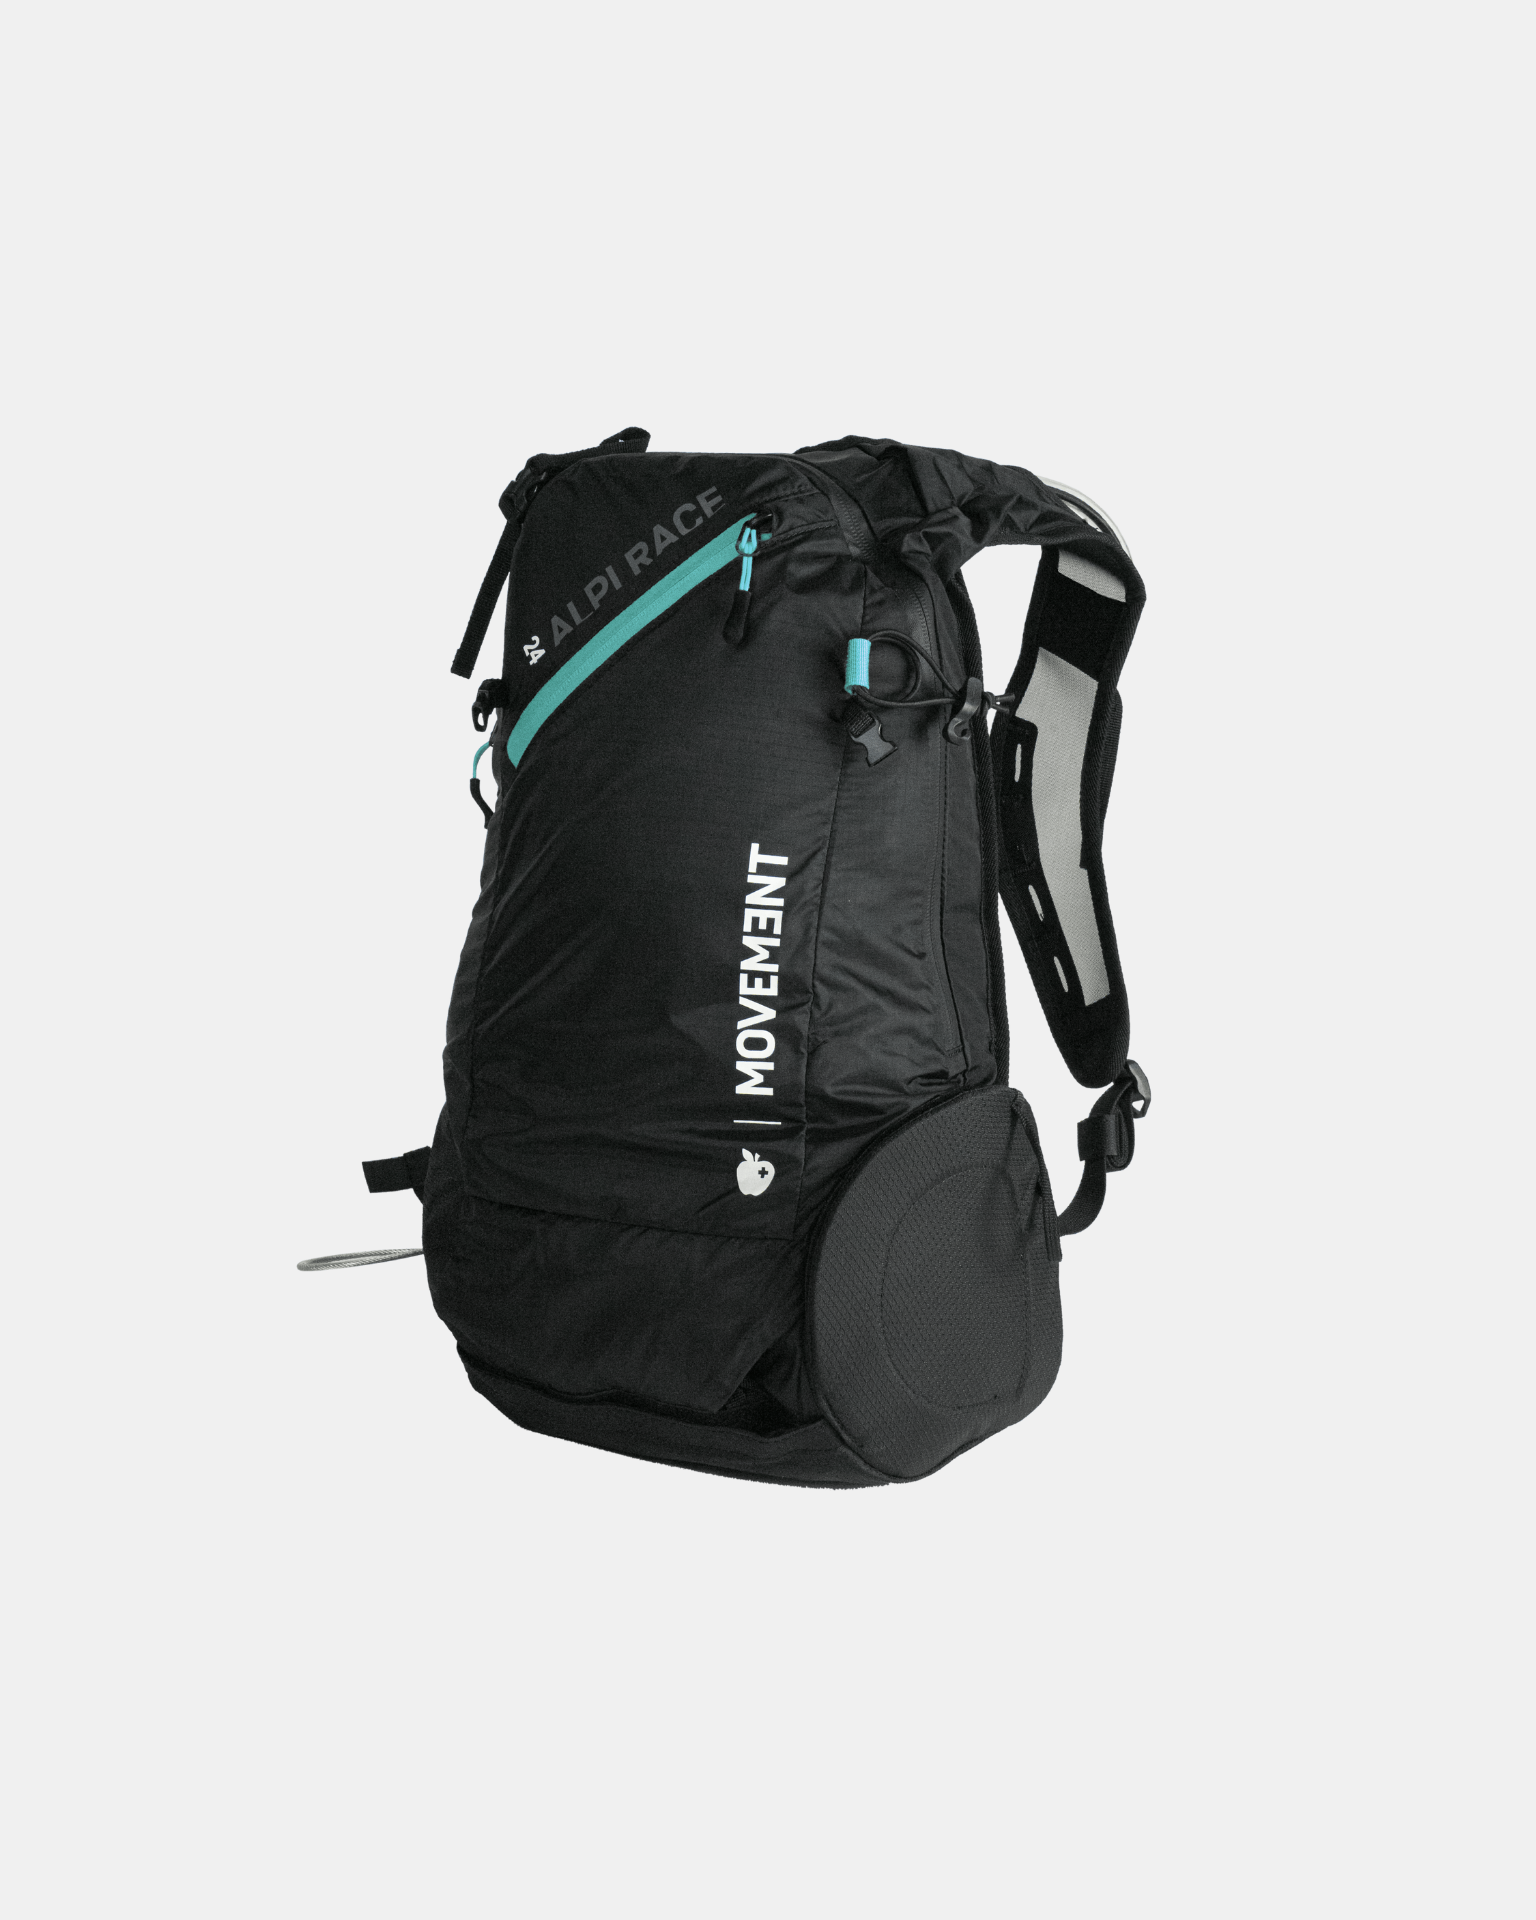 Streamline your speed touring adventures with Movement's Alpi Race backpack.